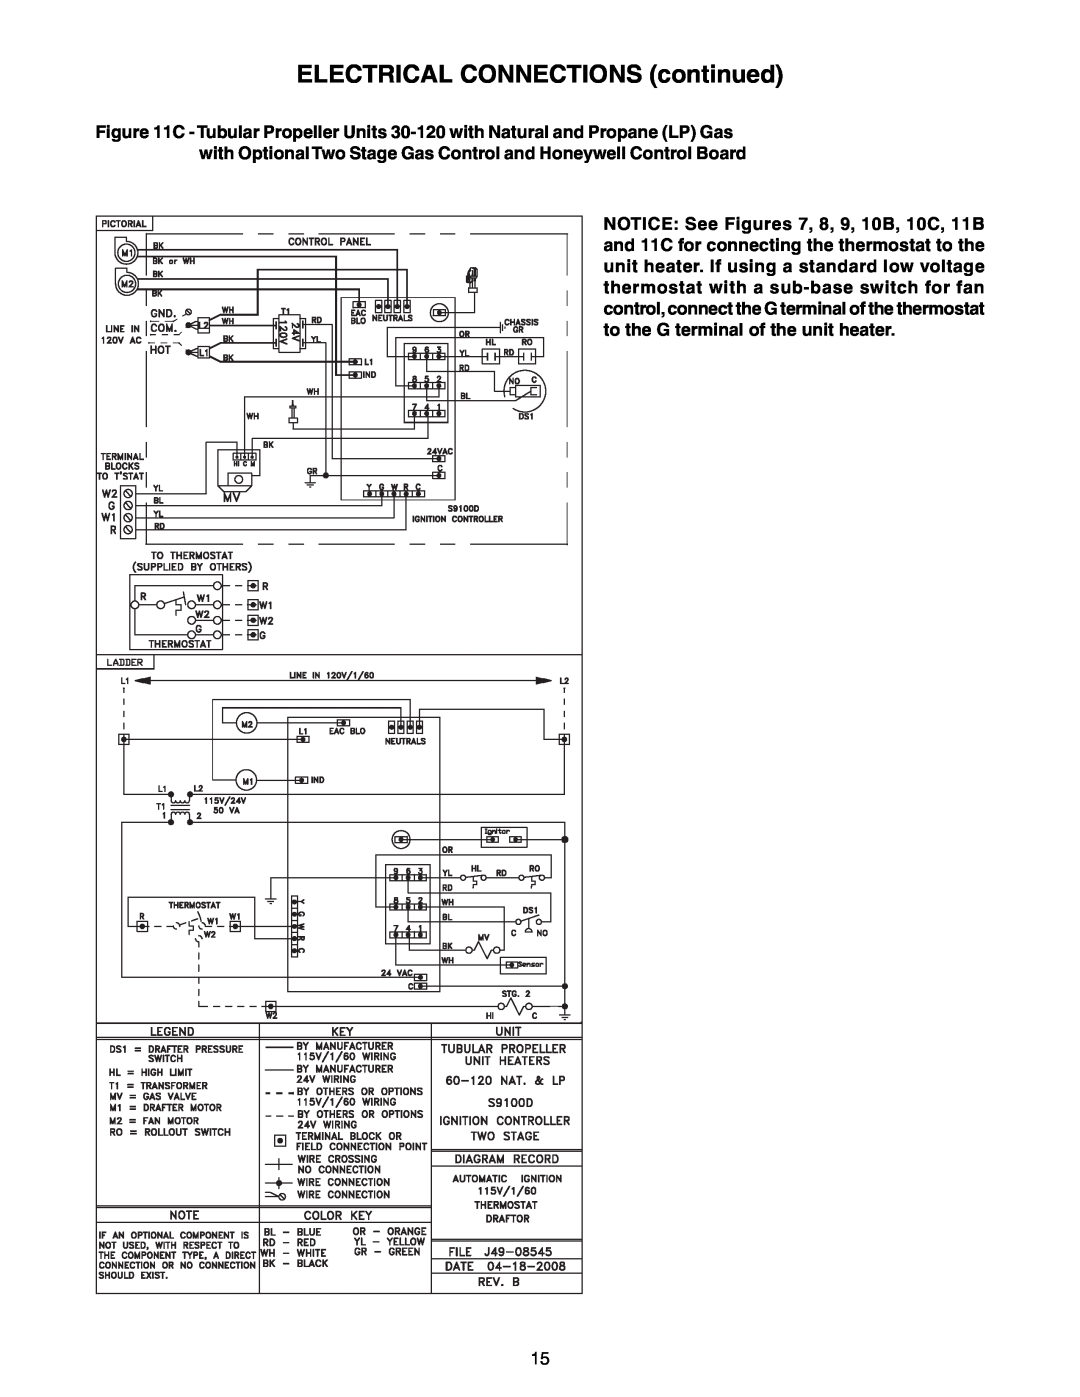 Sterling GG-75, GG-90, GG-60, GG-45, GG-120, GG-30, GG-105 specifications ELECTRICAL CONNECTIONS continued 